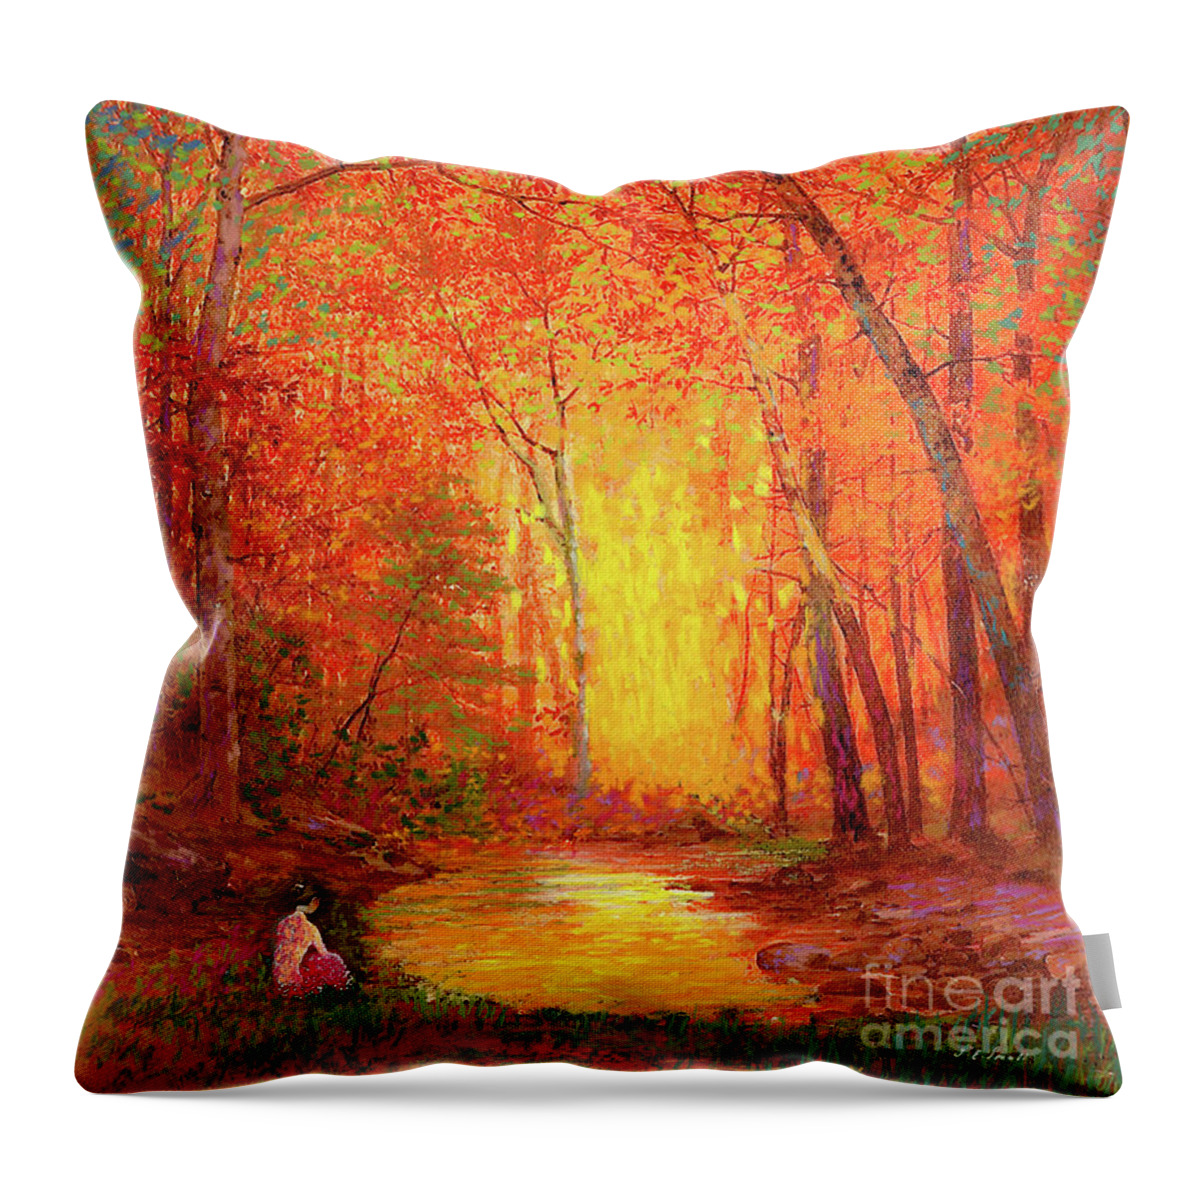 Meditation Throw Pillow featuring the painting In the Presence of Light Meditation by Jane Small